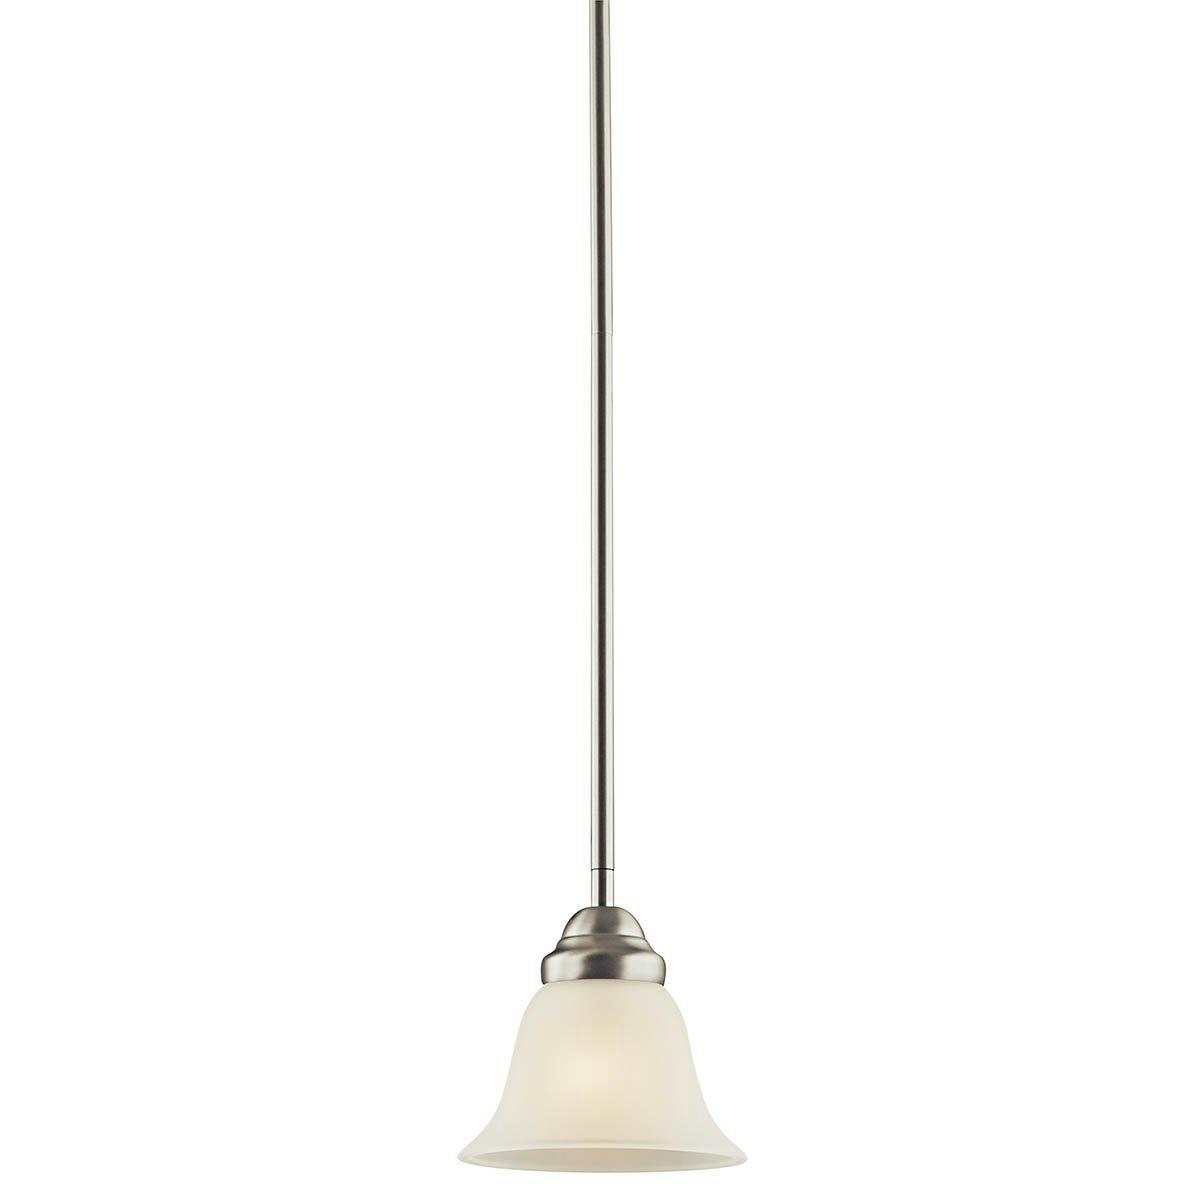 Wynberg 6" 1 Light Mini Pendant in Nickel on a white background